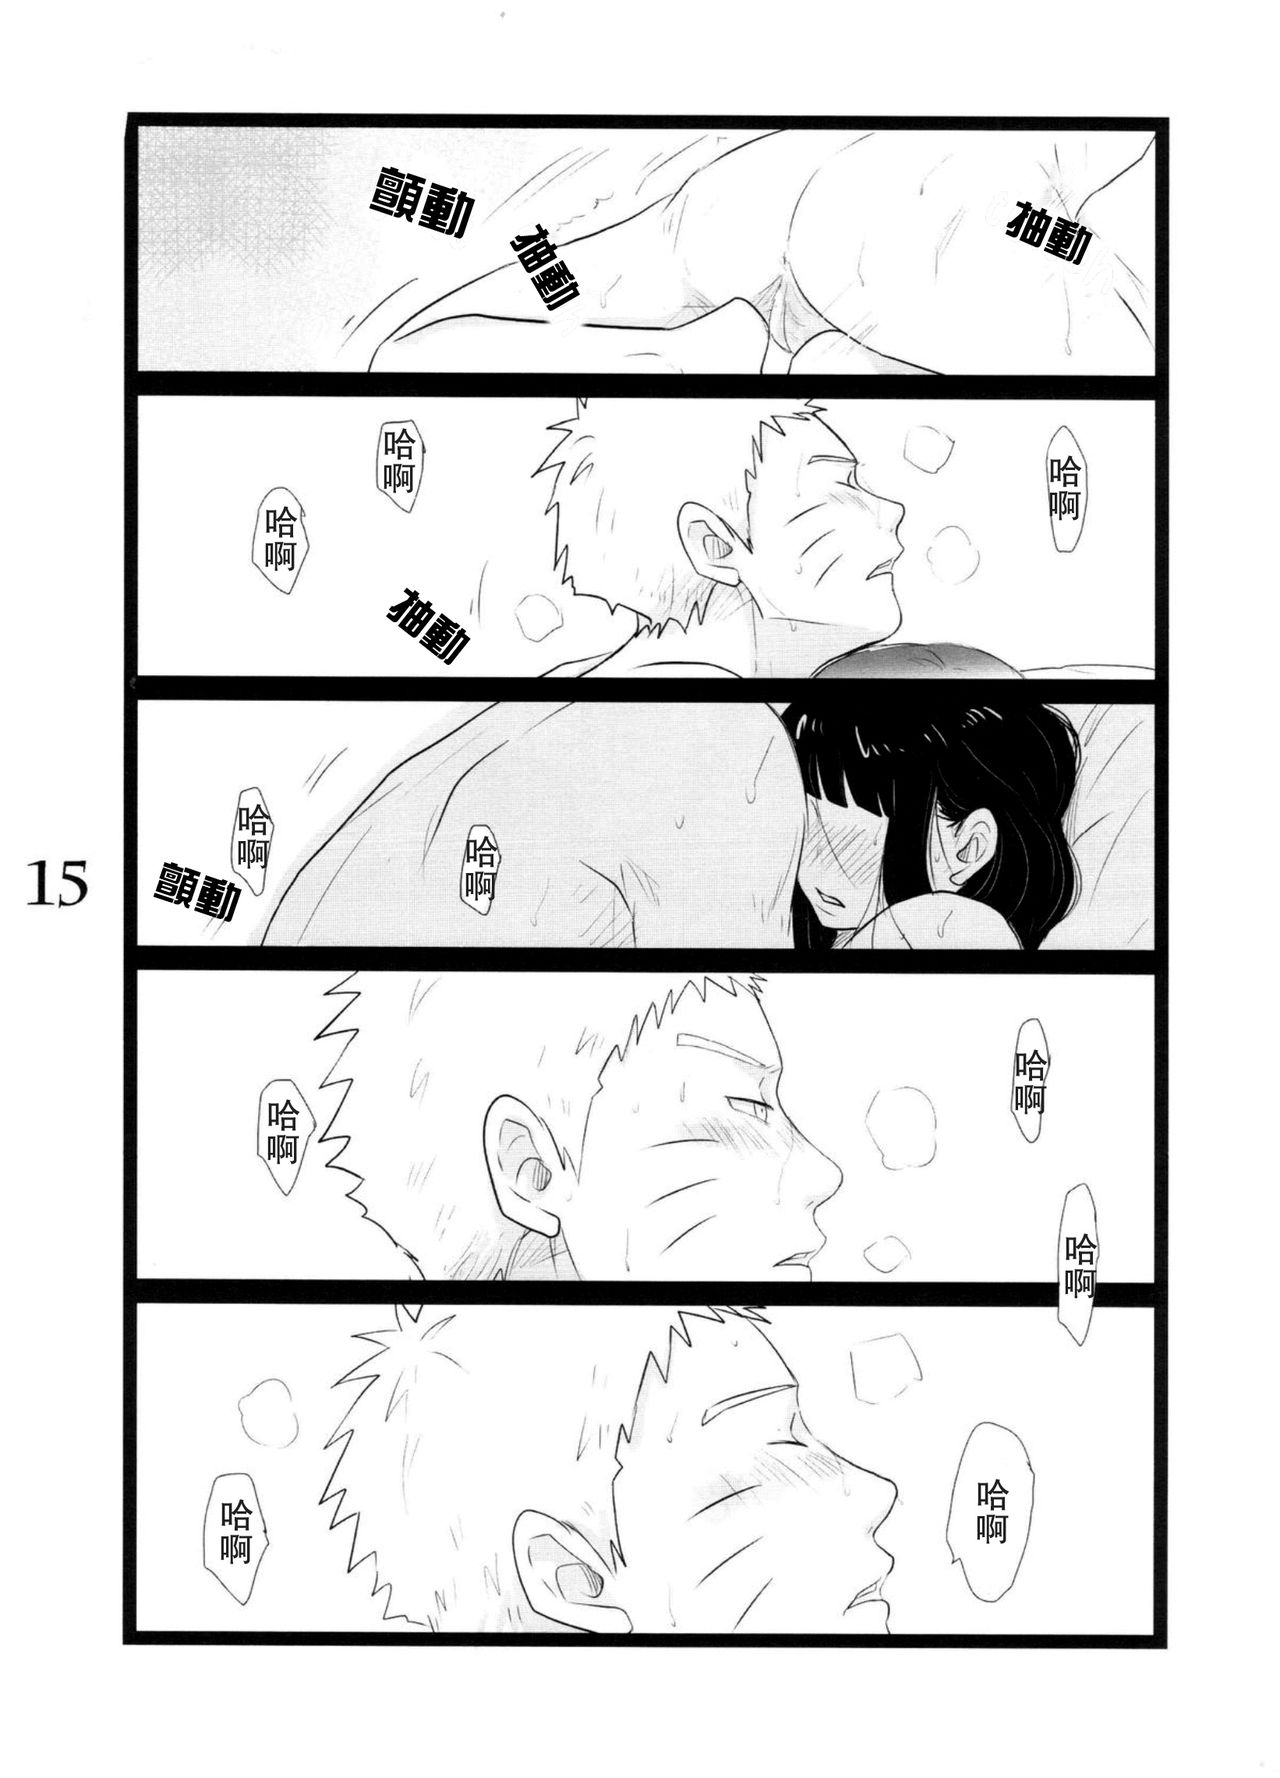 (C88) [blink (shimoyake)] YOUR MY SWEET - I LOVE YOU DARLING (Naruto) [Chinese] [沒有漢化] page 16 full